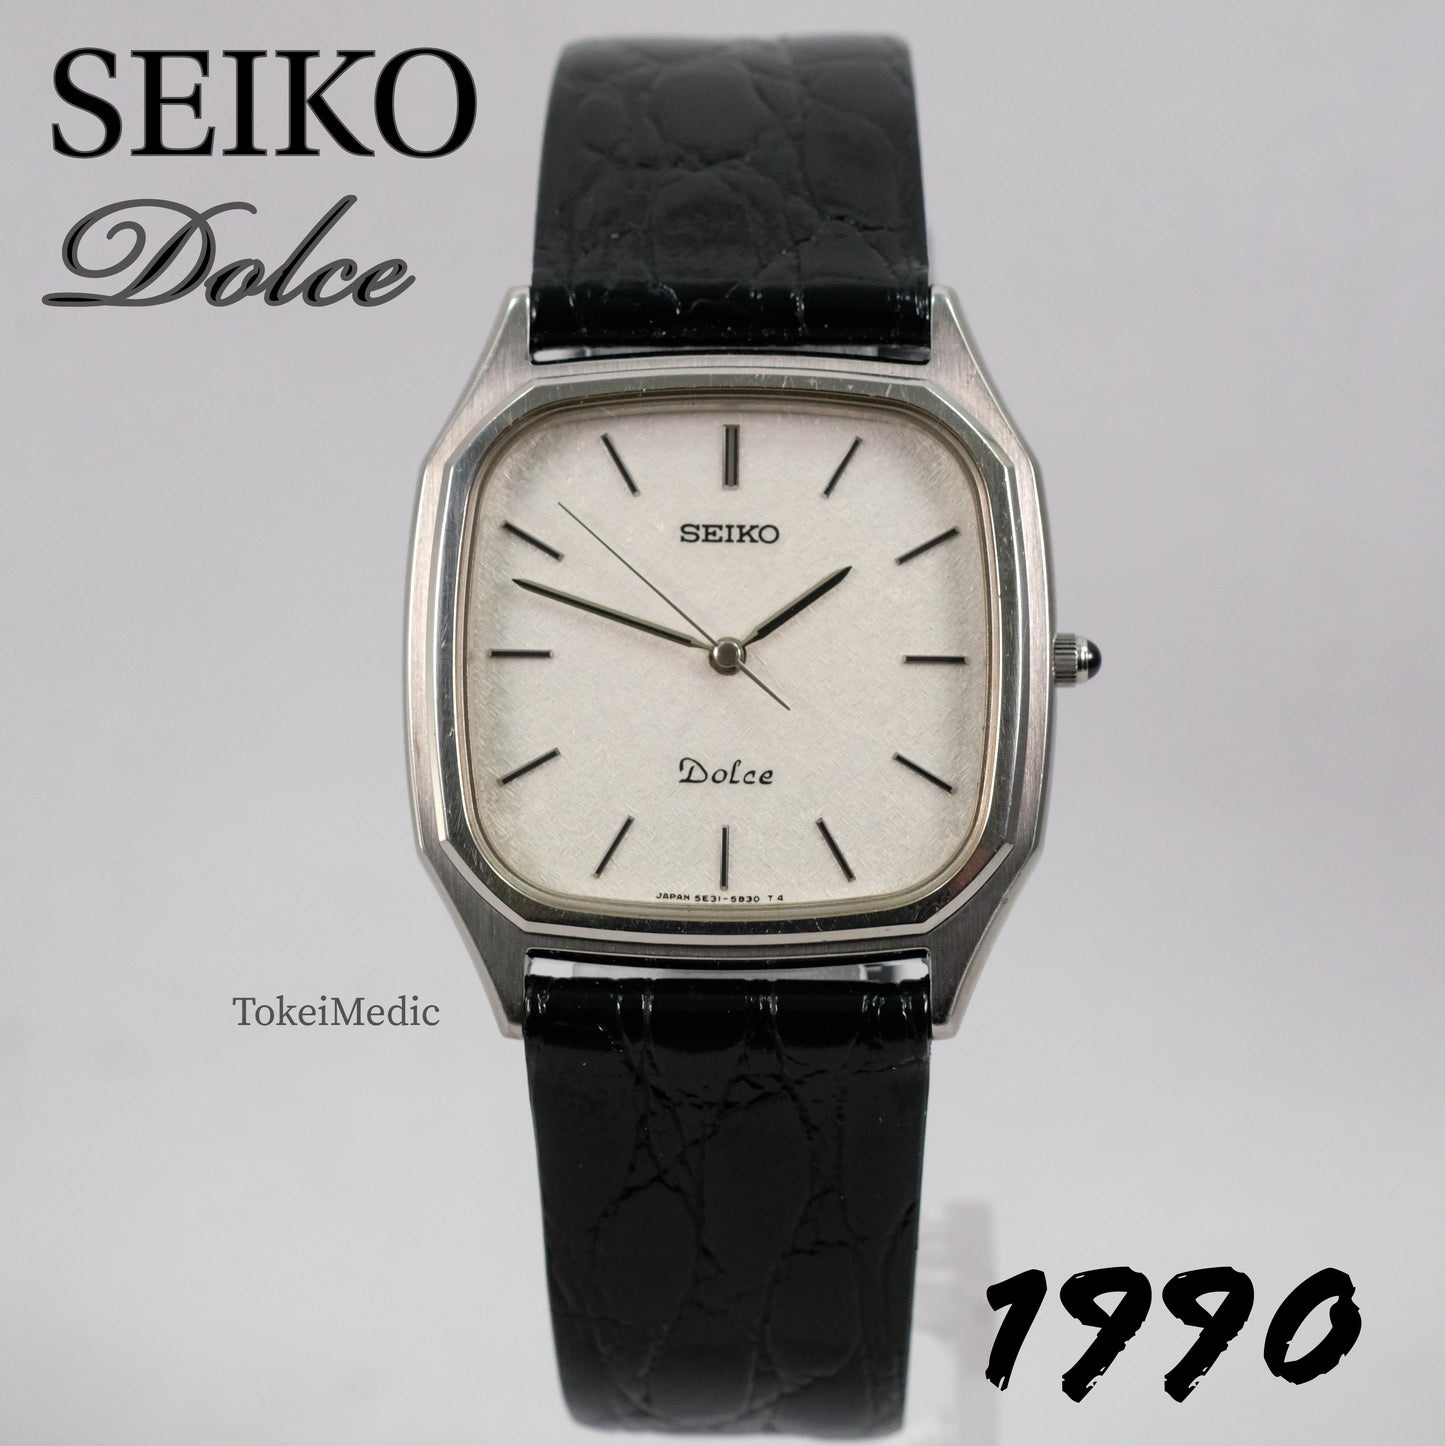 Reserved! Do not buy! 1990 Seiko Dolce 5E31-5B10